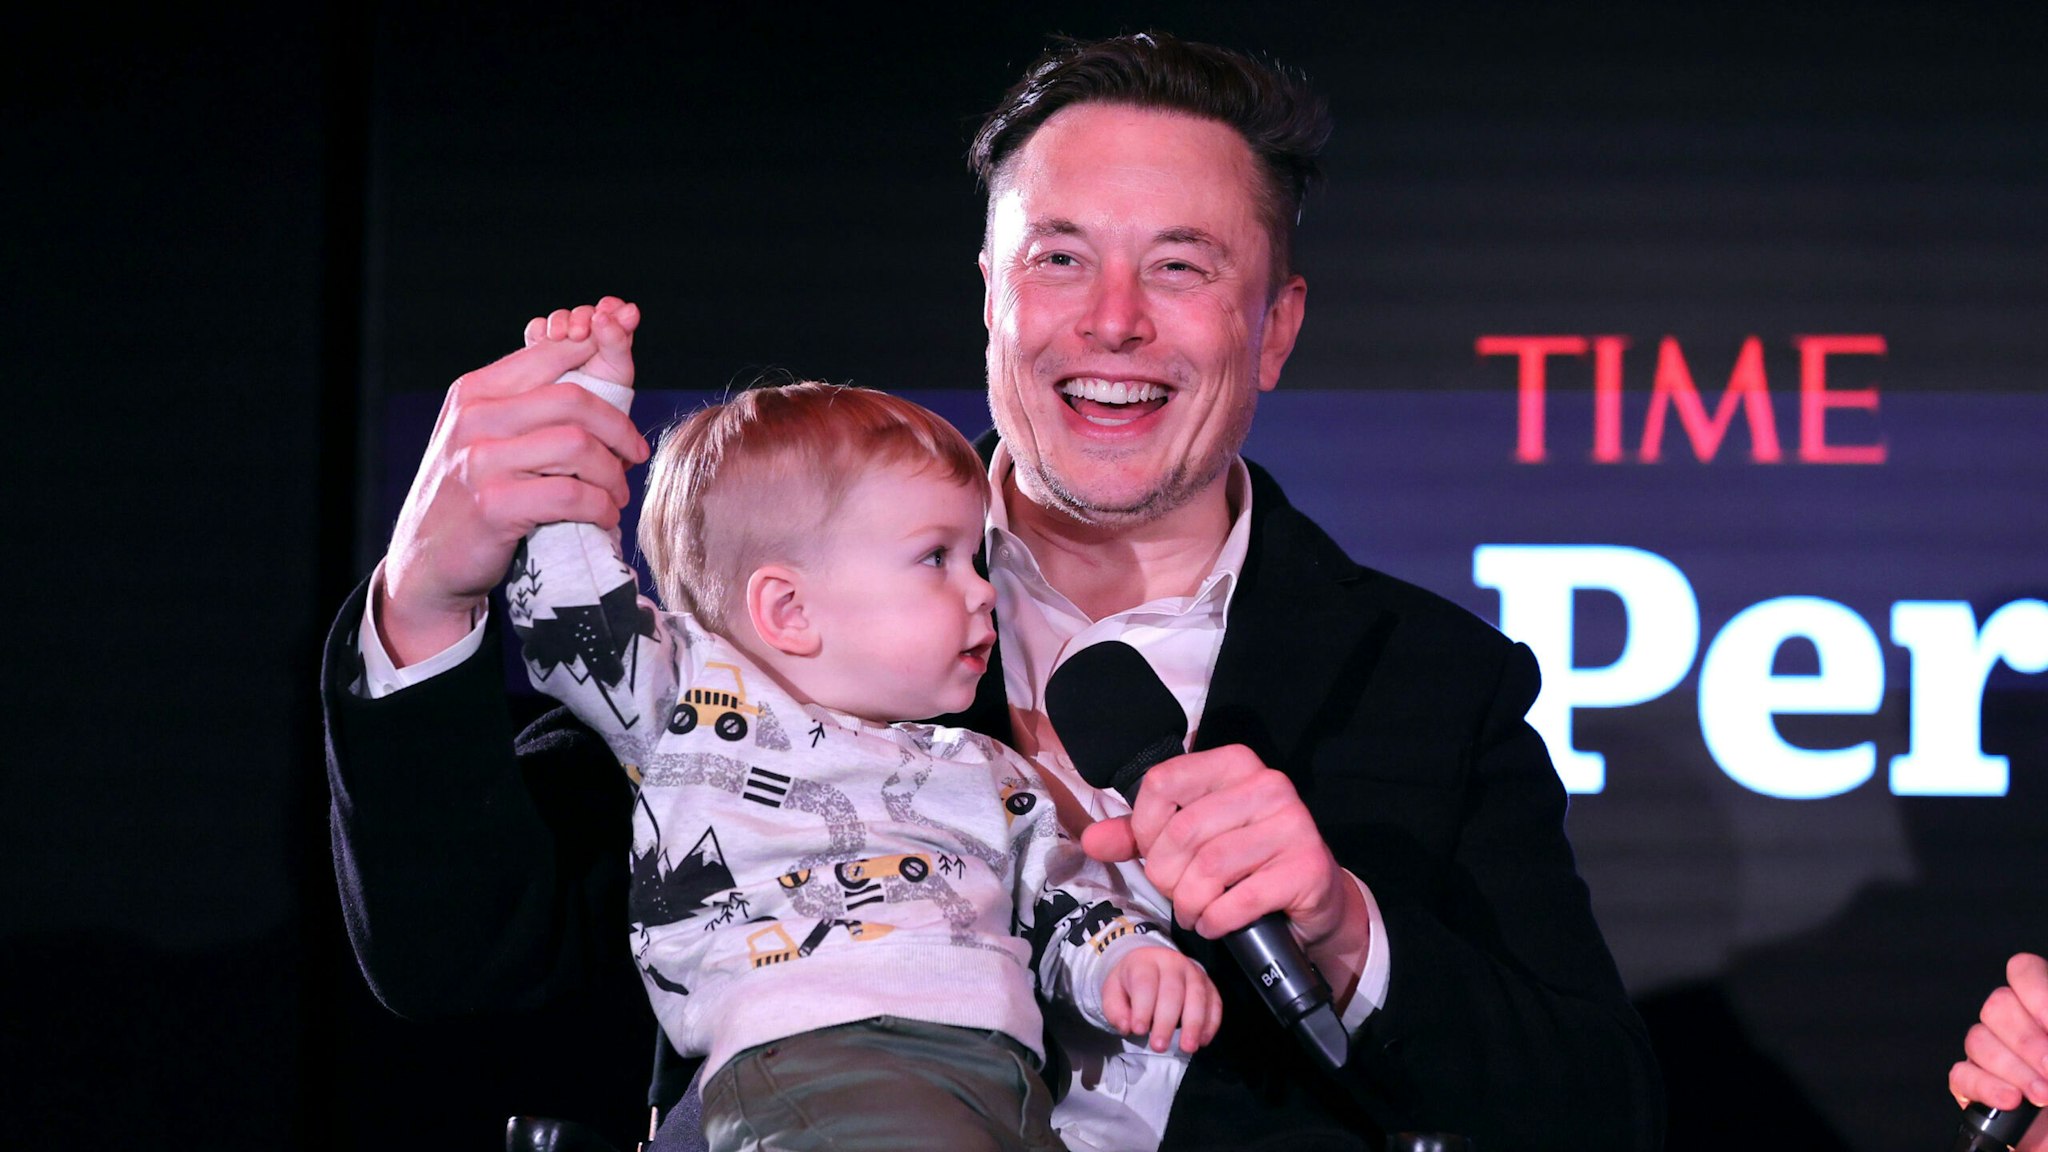 NEW YORK, NEW YORK - DECEMBER 13: Elon Musk and son X Æ A-12 on stage TIME Person of the Year on December 13, 2021 in New York City.